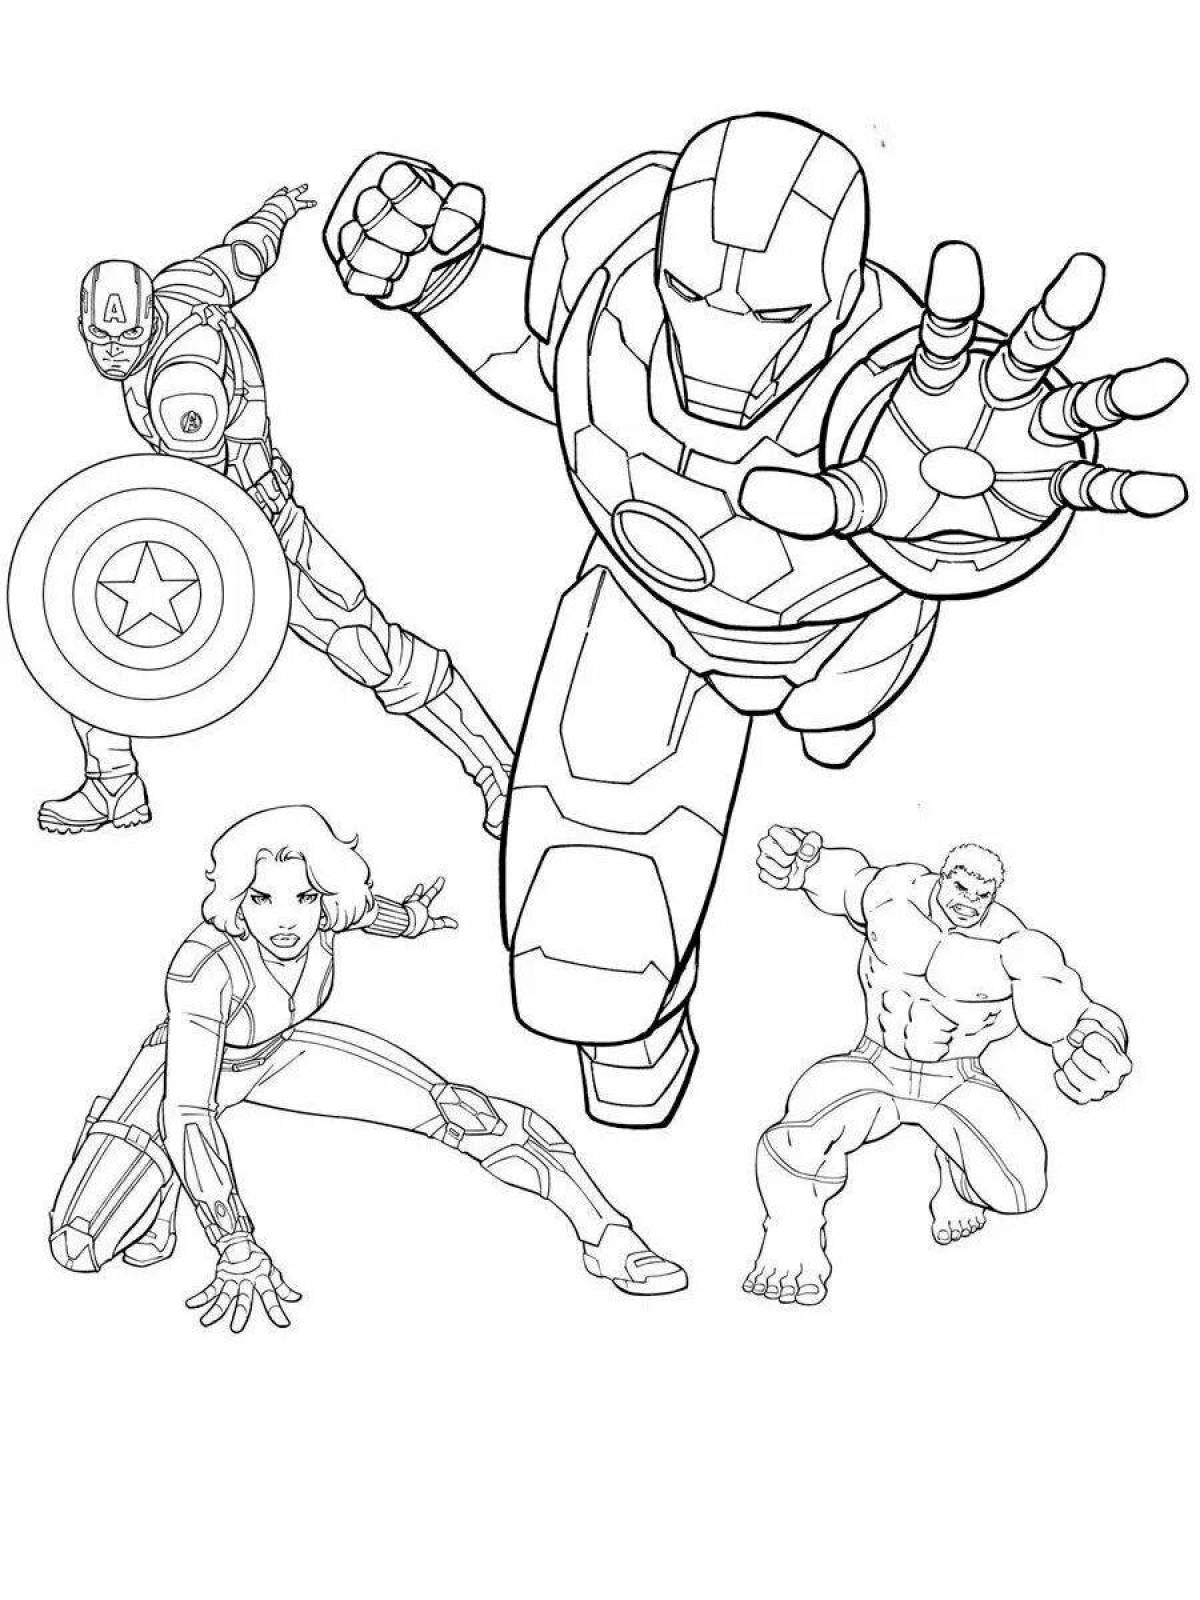 Avengers fun coloring for boys